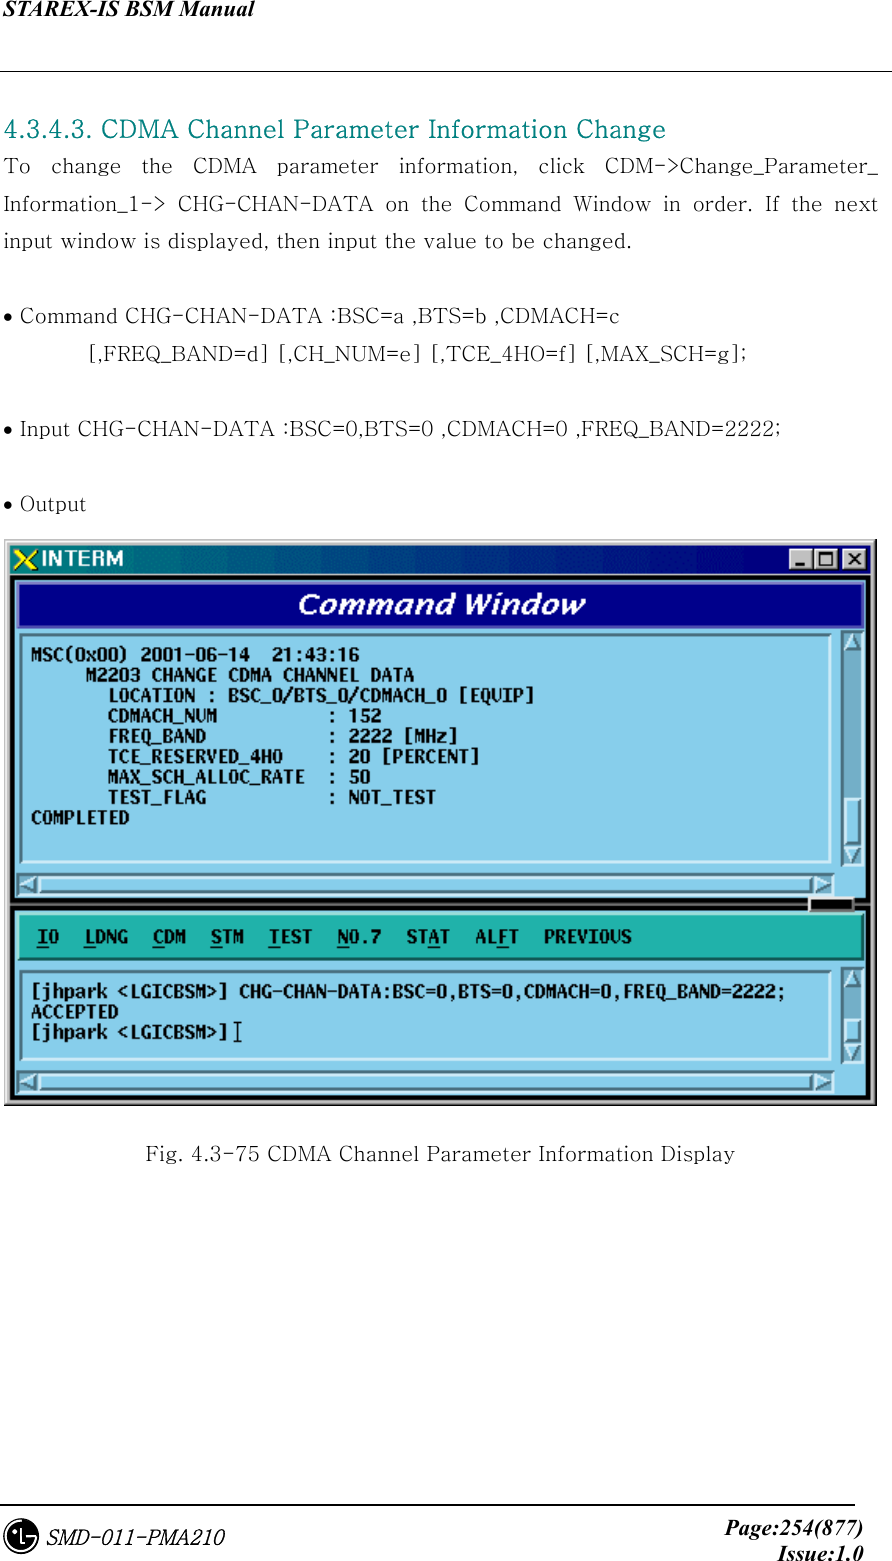 STAREX-IS BSM Manual     Page:254(877)Issue:1.0SMD-011-PMA210  4.3.4.3. CDMA Channel Parameter Information Change To  change  the  CDMA  parameter  information,  click  CDM-&gt;Change_Parameter_ Information_1-&gt; CHG-CHAN-DATA on the Command Window in order. If  the  next input window is displayed, then input the value to be changed.  • Command CHG-CHAN-DATA :BSC=a ,BTS=b ,CDMACH=c   [,FREQ_BAND=d] [,CH_NUM=e] [,TCE_4HO=f] [,MAX_SCH=g];  • Input CHG-CHAN-DATA :BSC=0,BTS=0 ,CDMACH=0 ,FREQ_BAND=2222;  • Output  Fig. 4.3-75 CDMA Channel Parameter Information Display   